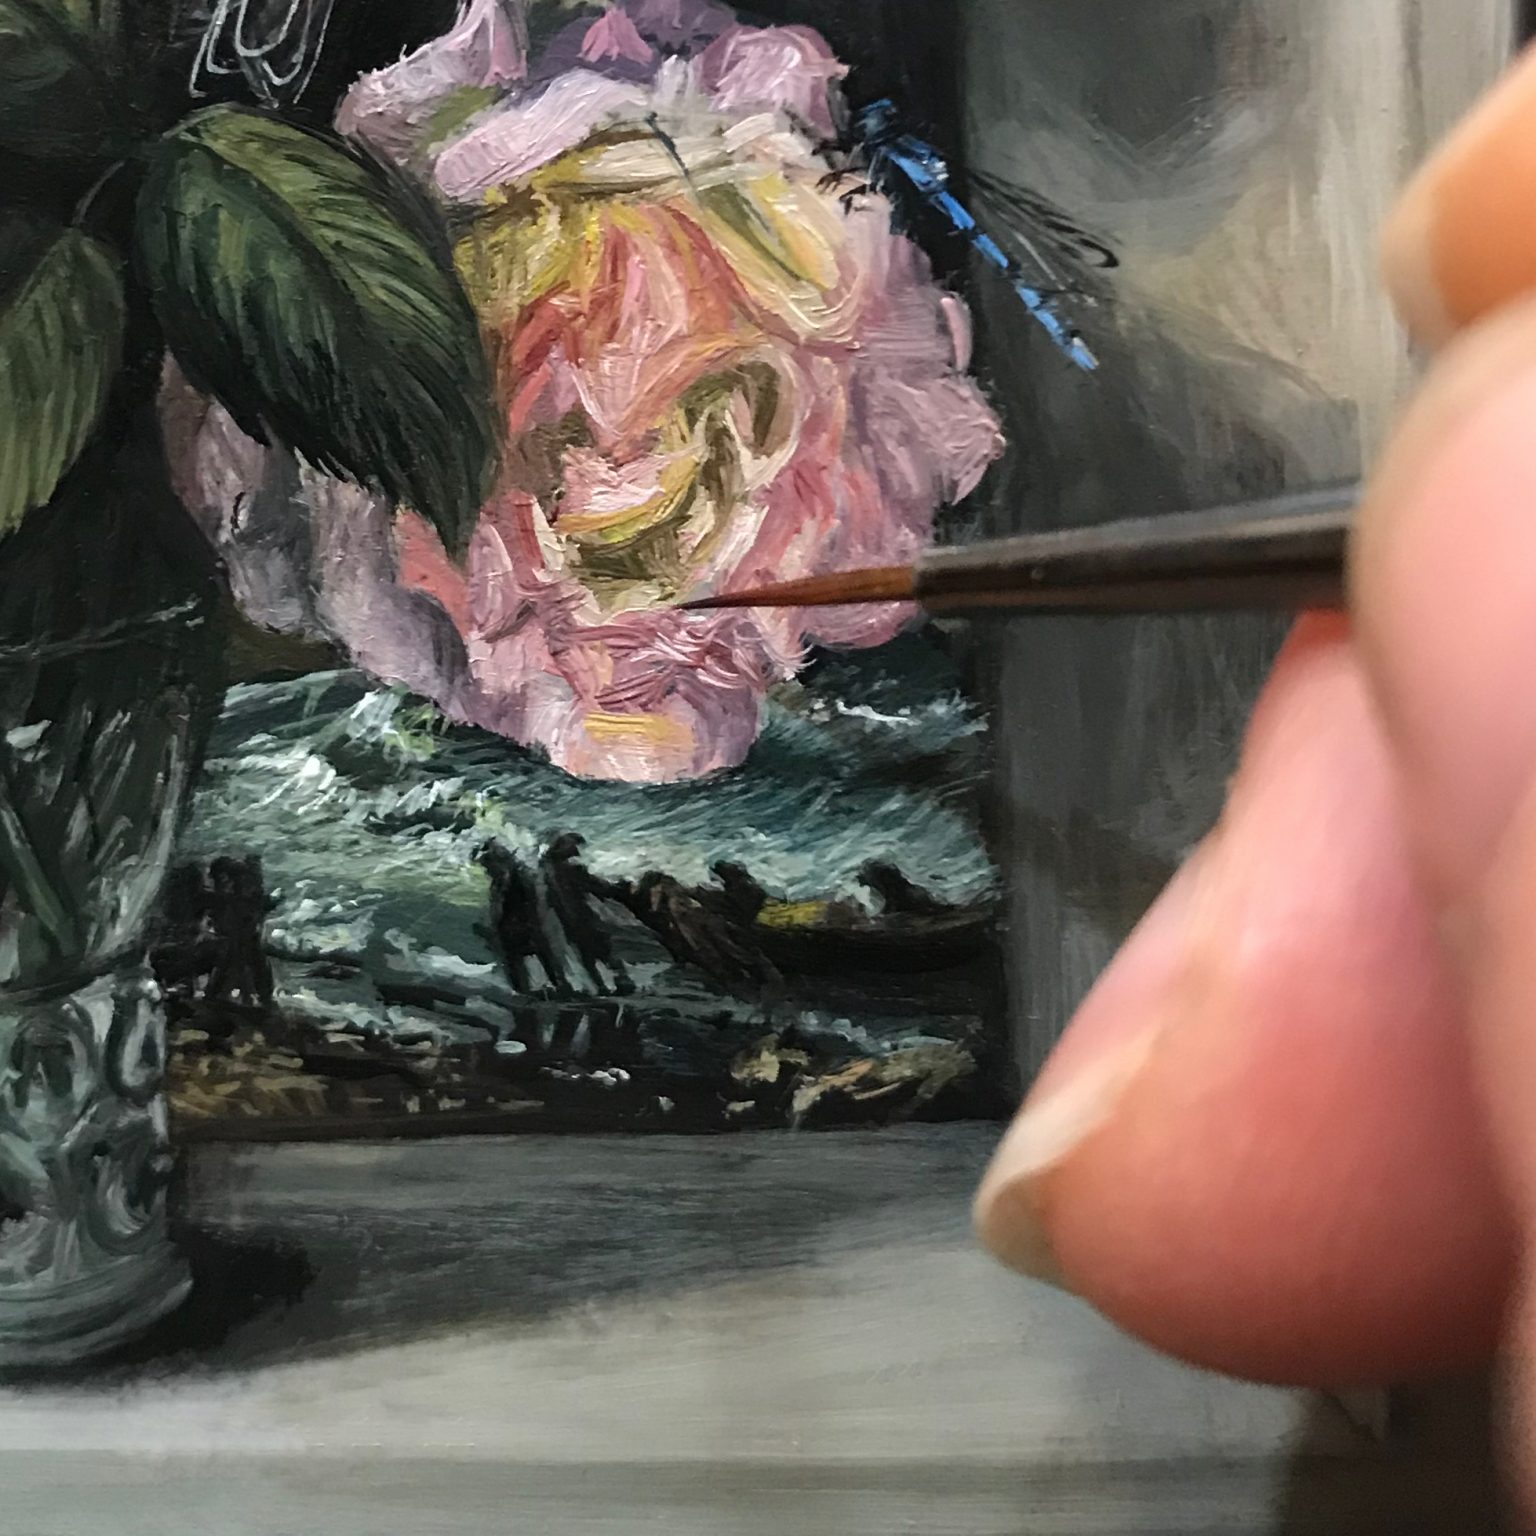 detail of miniature painting with peace roses and bierstade painting reproduced in background